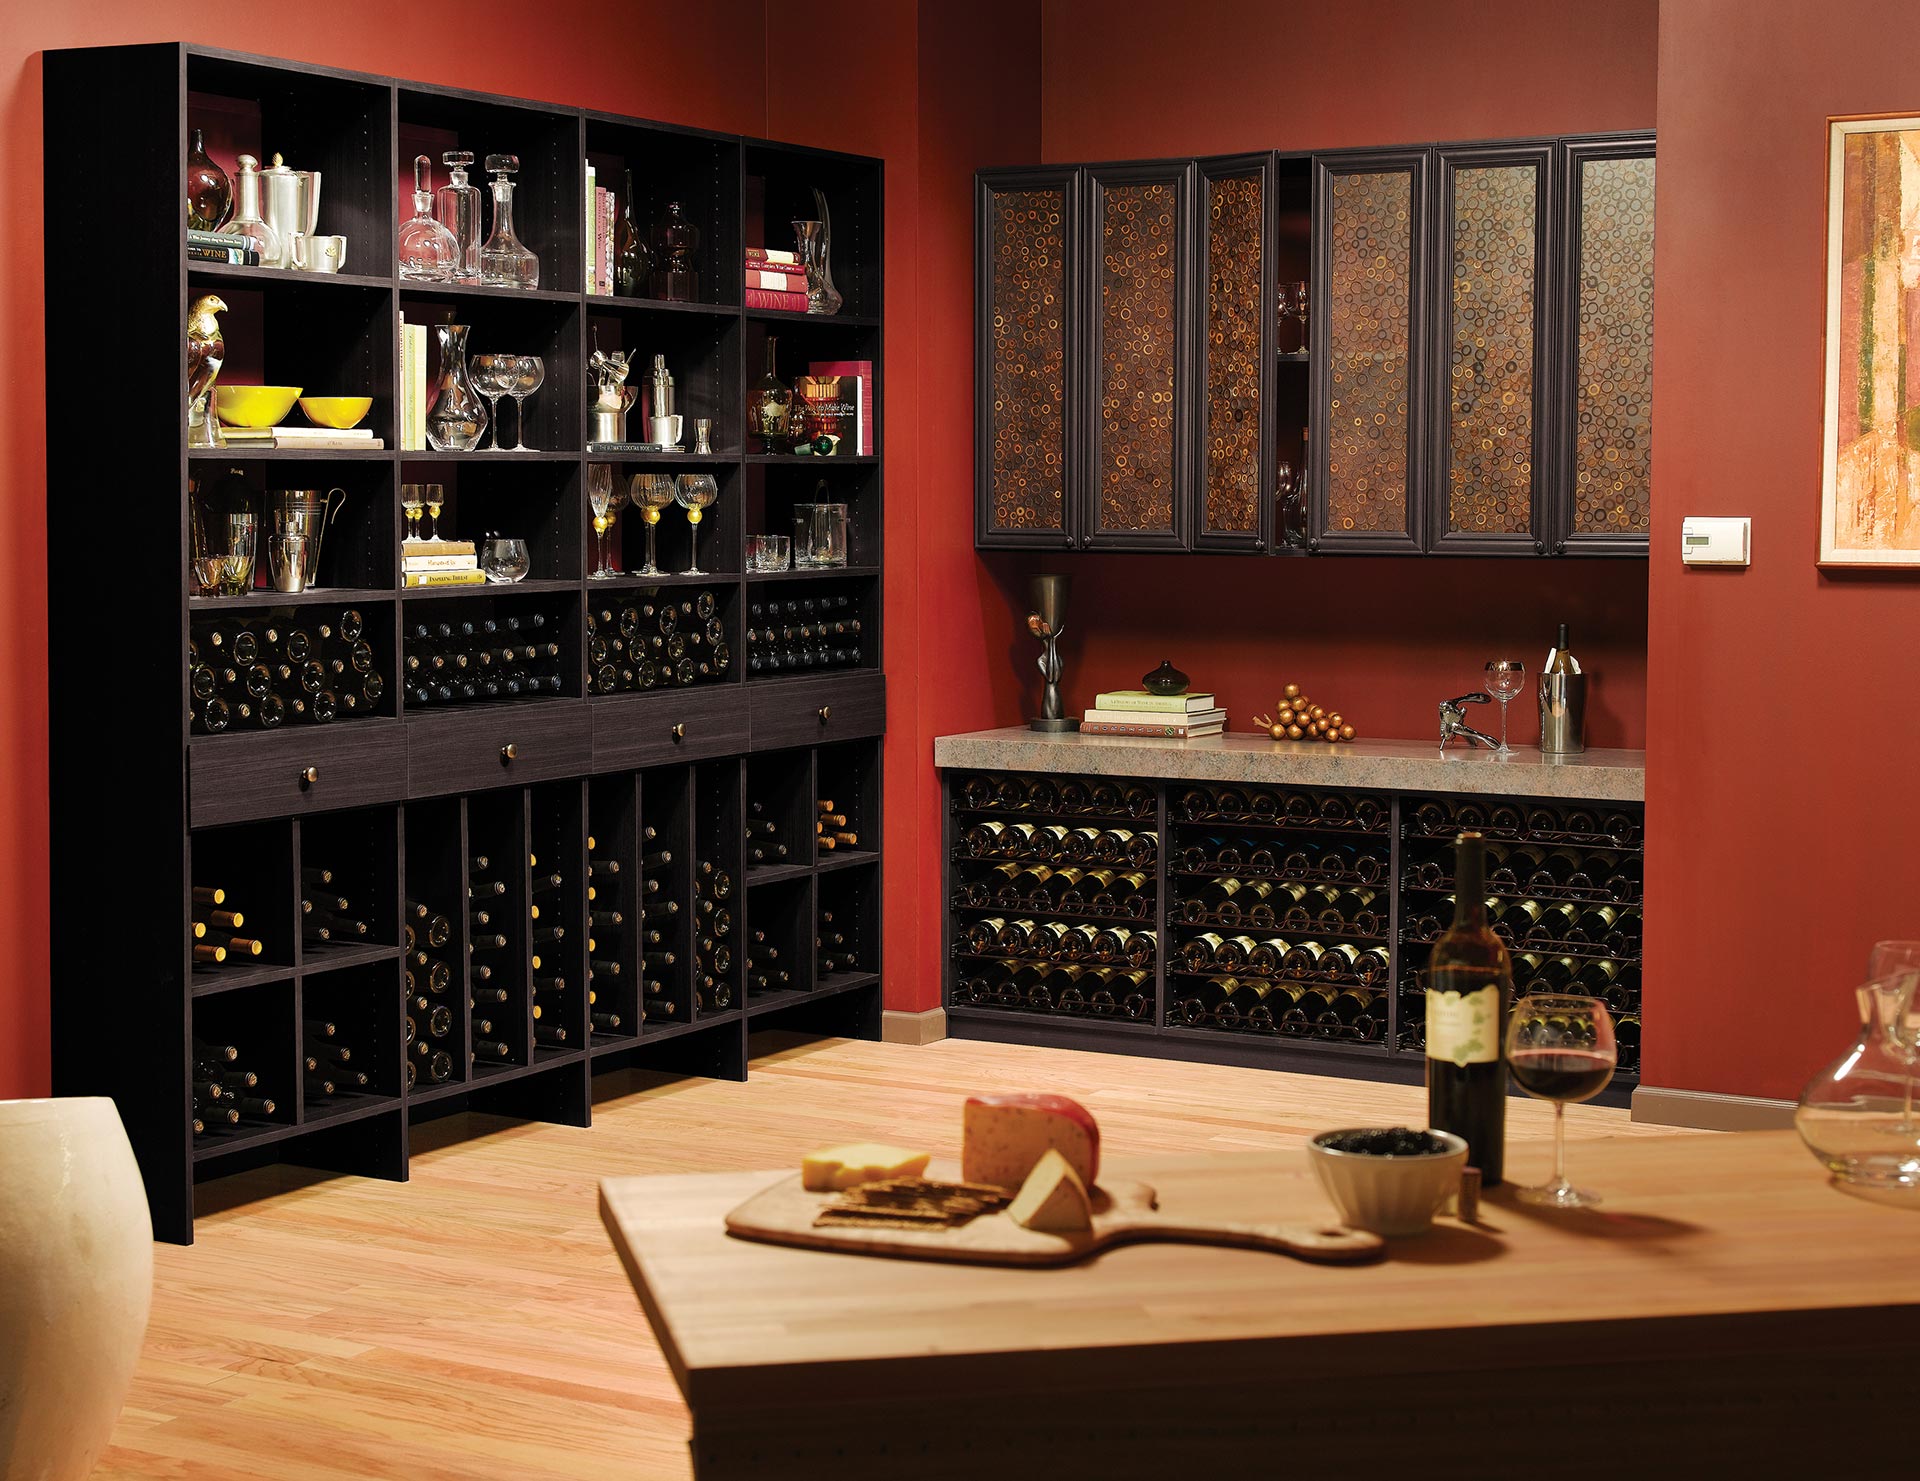 open kitchen shelves inspiration with wine rack